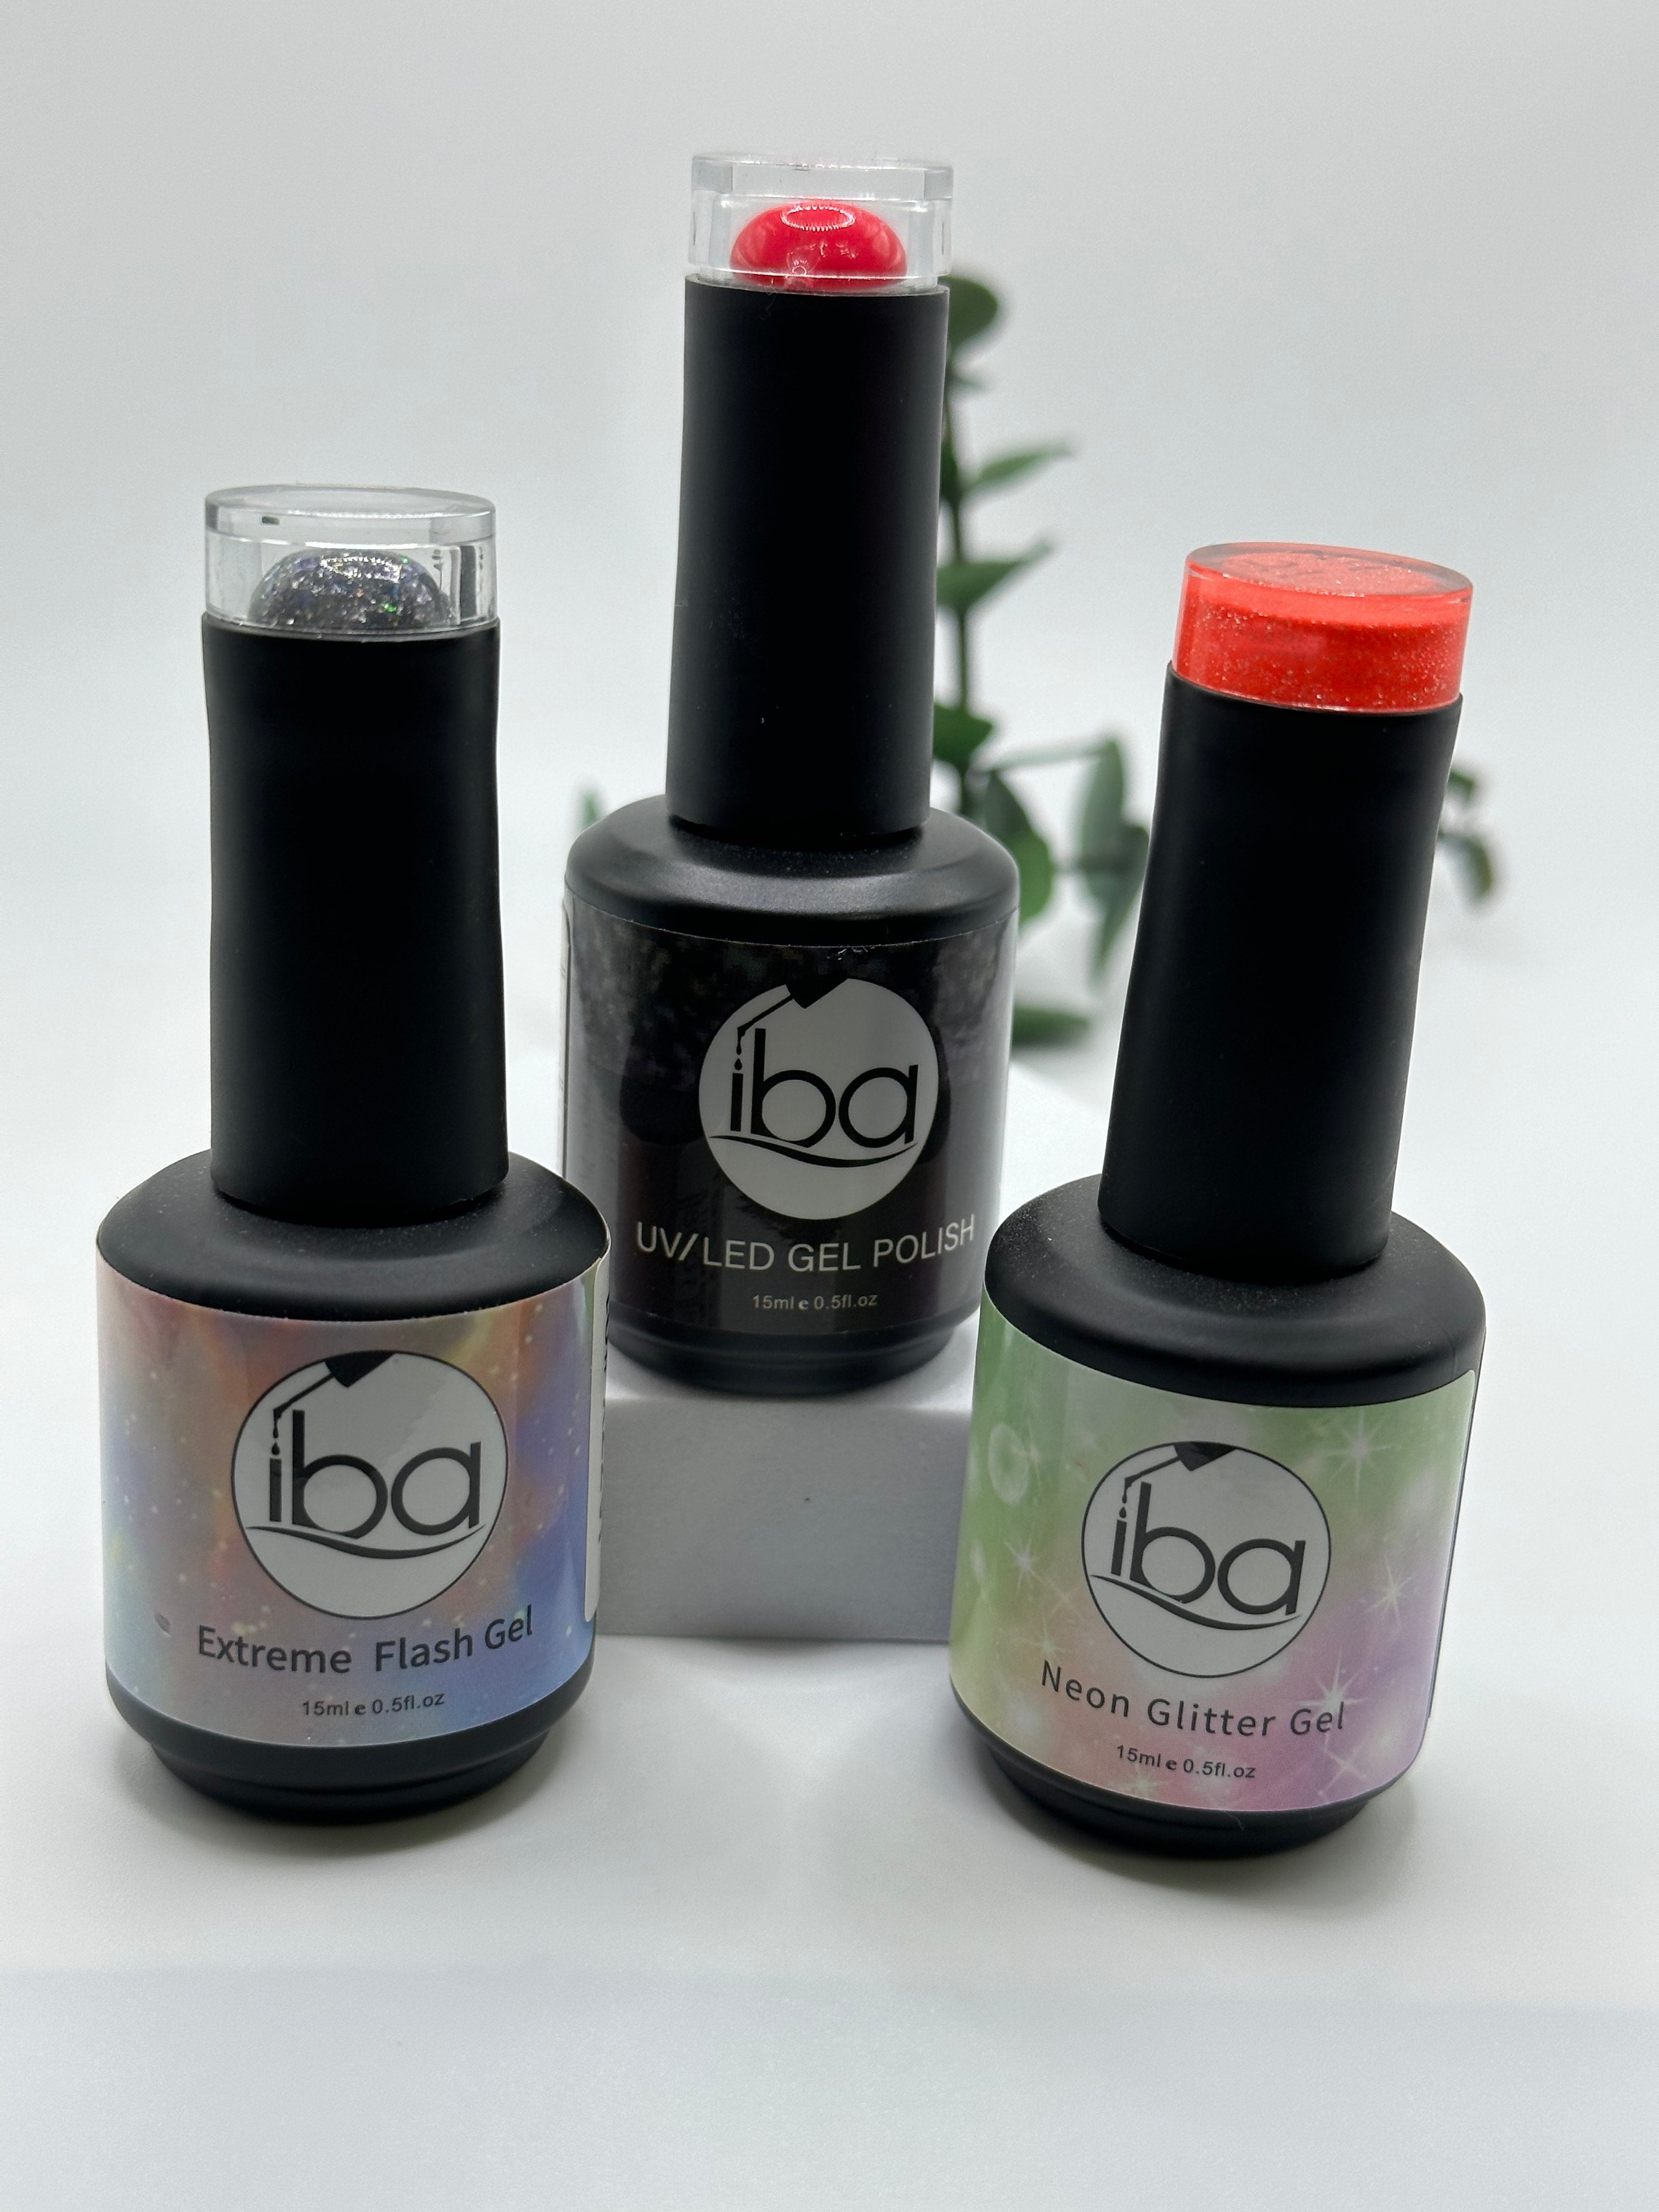 Iba Cosmetics - Have you picked you summer shade yet?? 💅 Iba Breathable  Nail Color Price: Rs.250 each 💅Free of 12 Harmful Toxins 💅Argan Oil  Enriched 💅Peta Certified Cruelty Free & Vegan